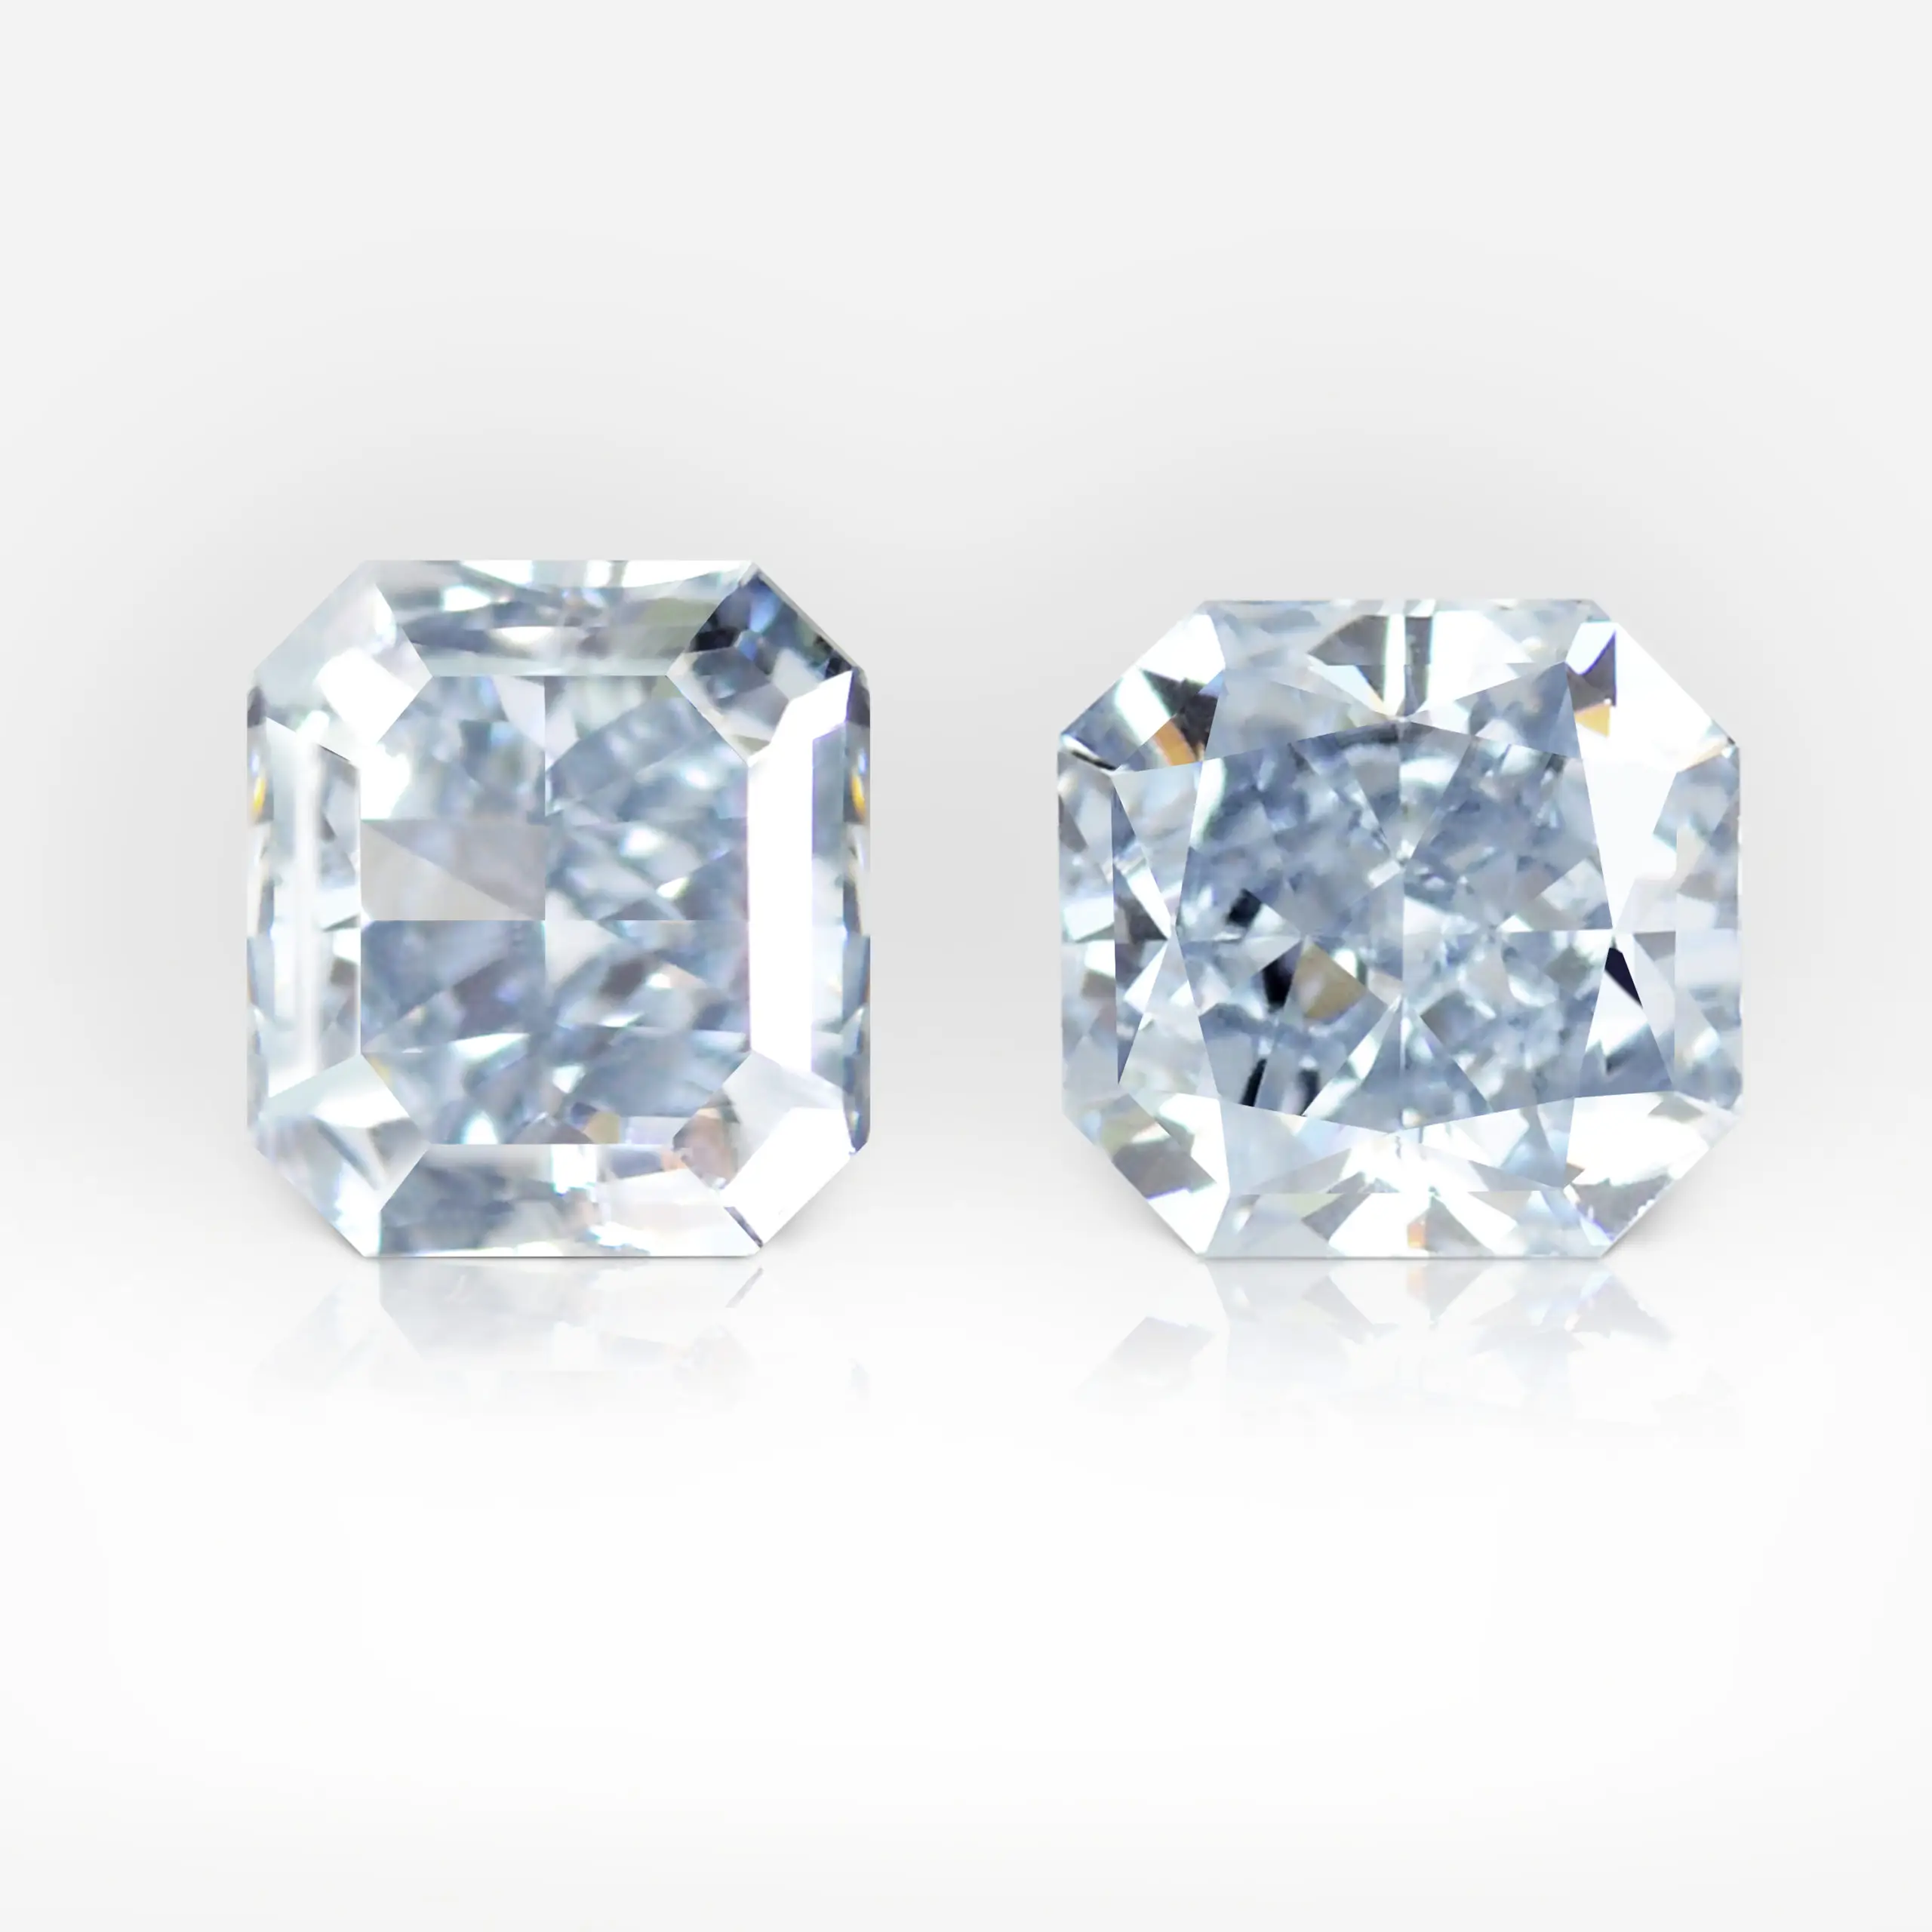 0.25 and 0.23 carat Pair of Fancy Intense Blue VS2/SI1 Radiant Shape Diamond GIA - picture 1